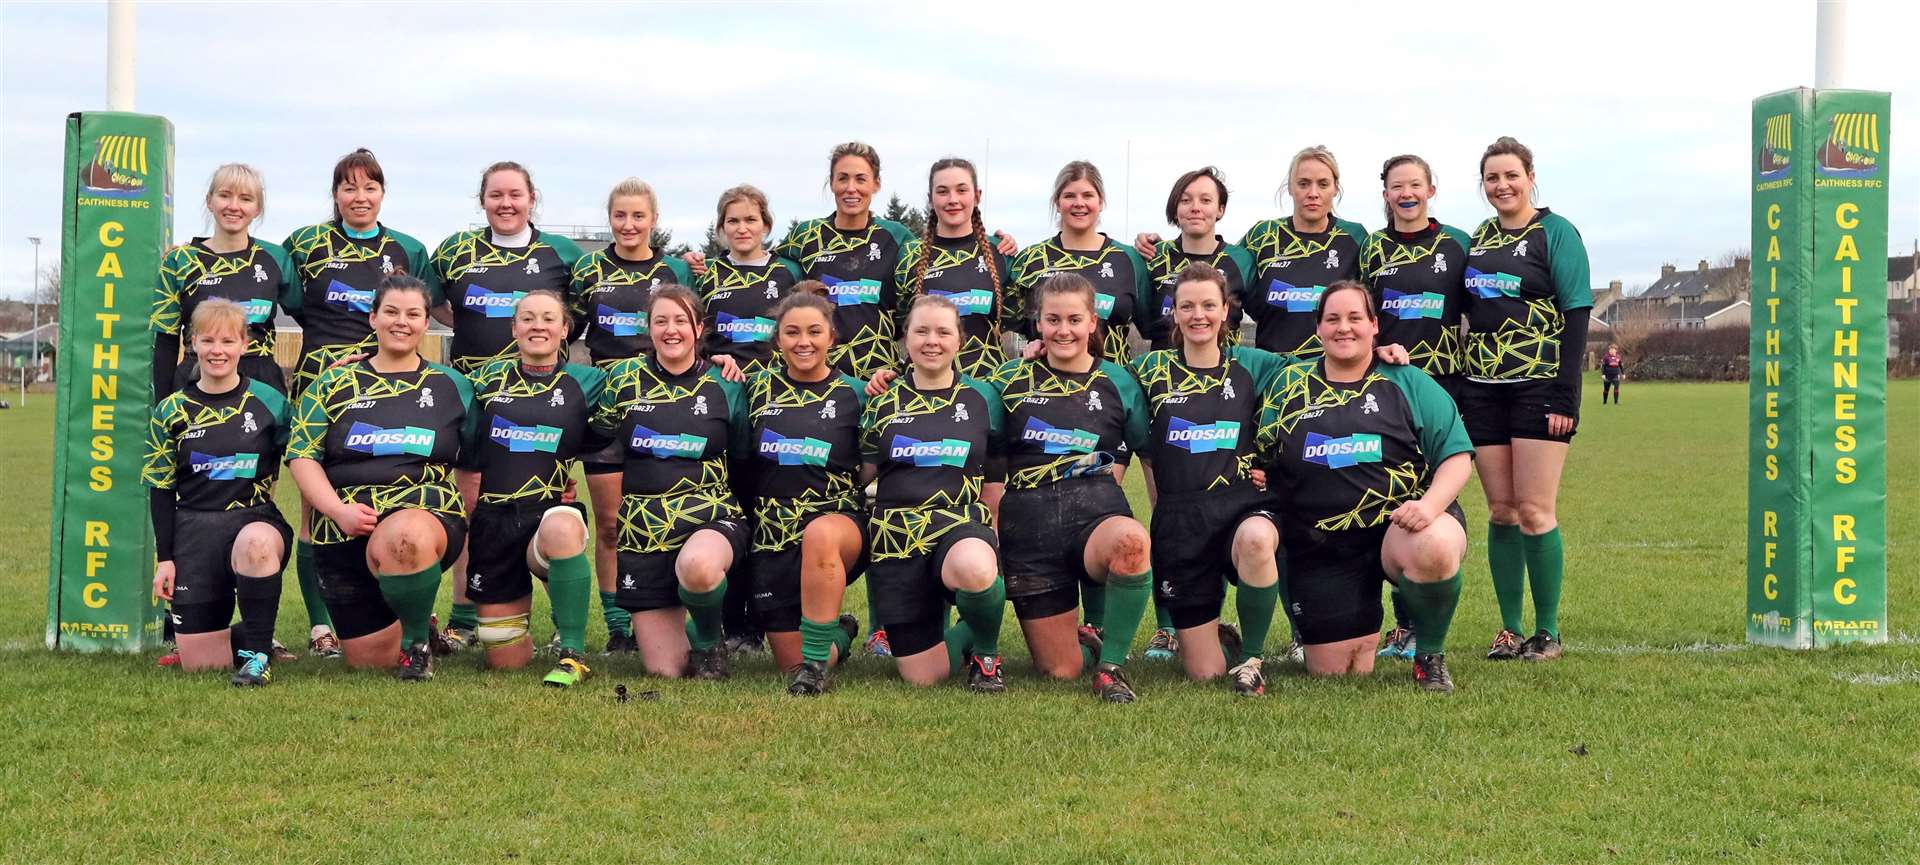 Caithness Krakens before their recent victory over Stornoway at Millbank in the Women's North Region League. Picture: James Gunn